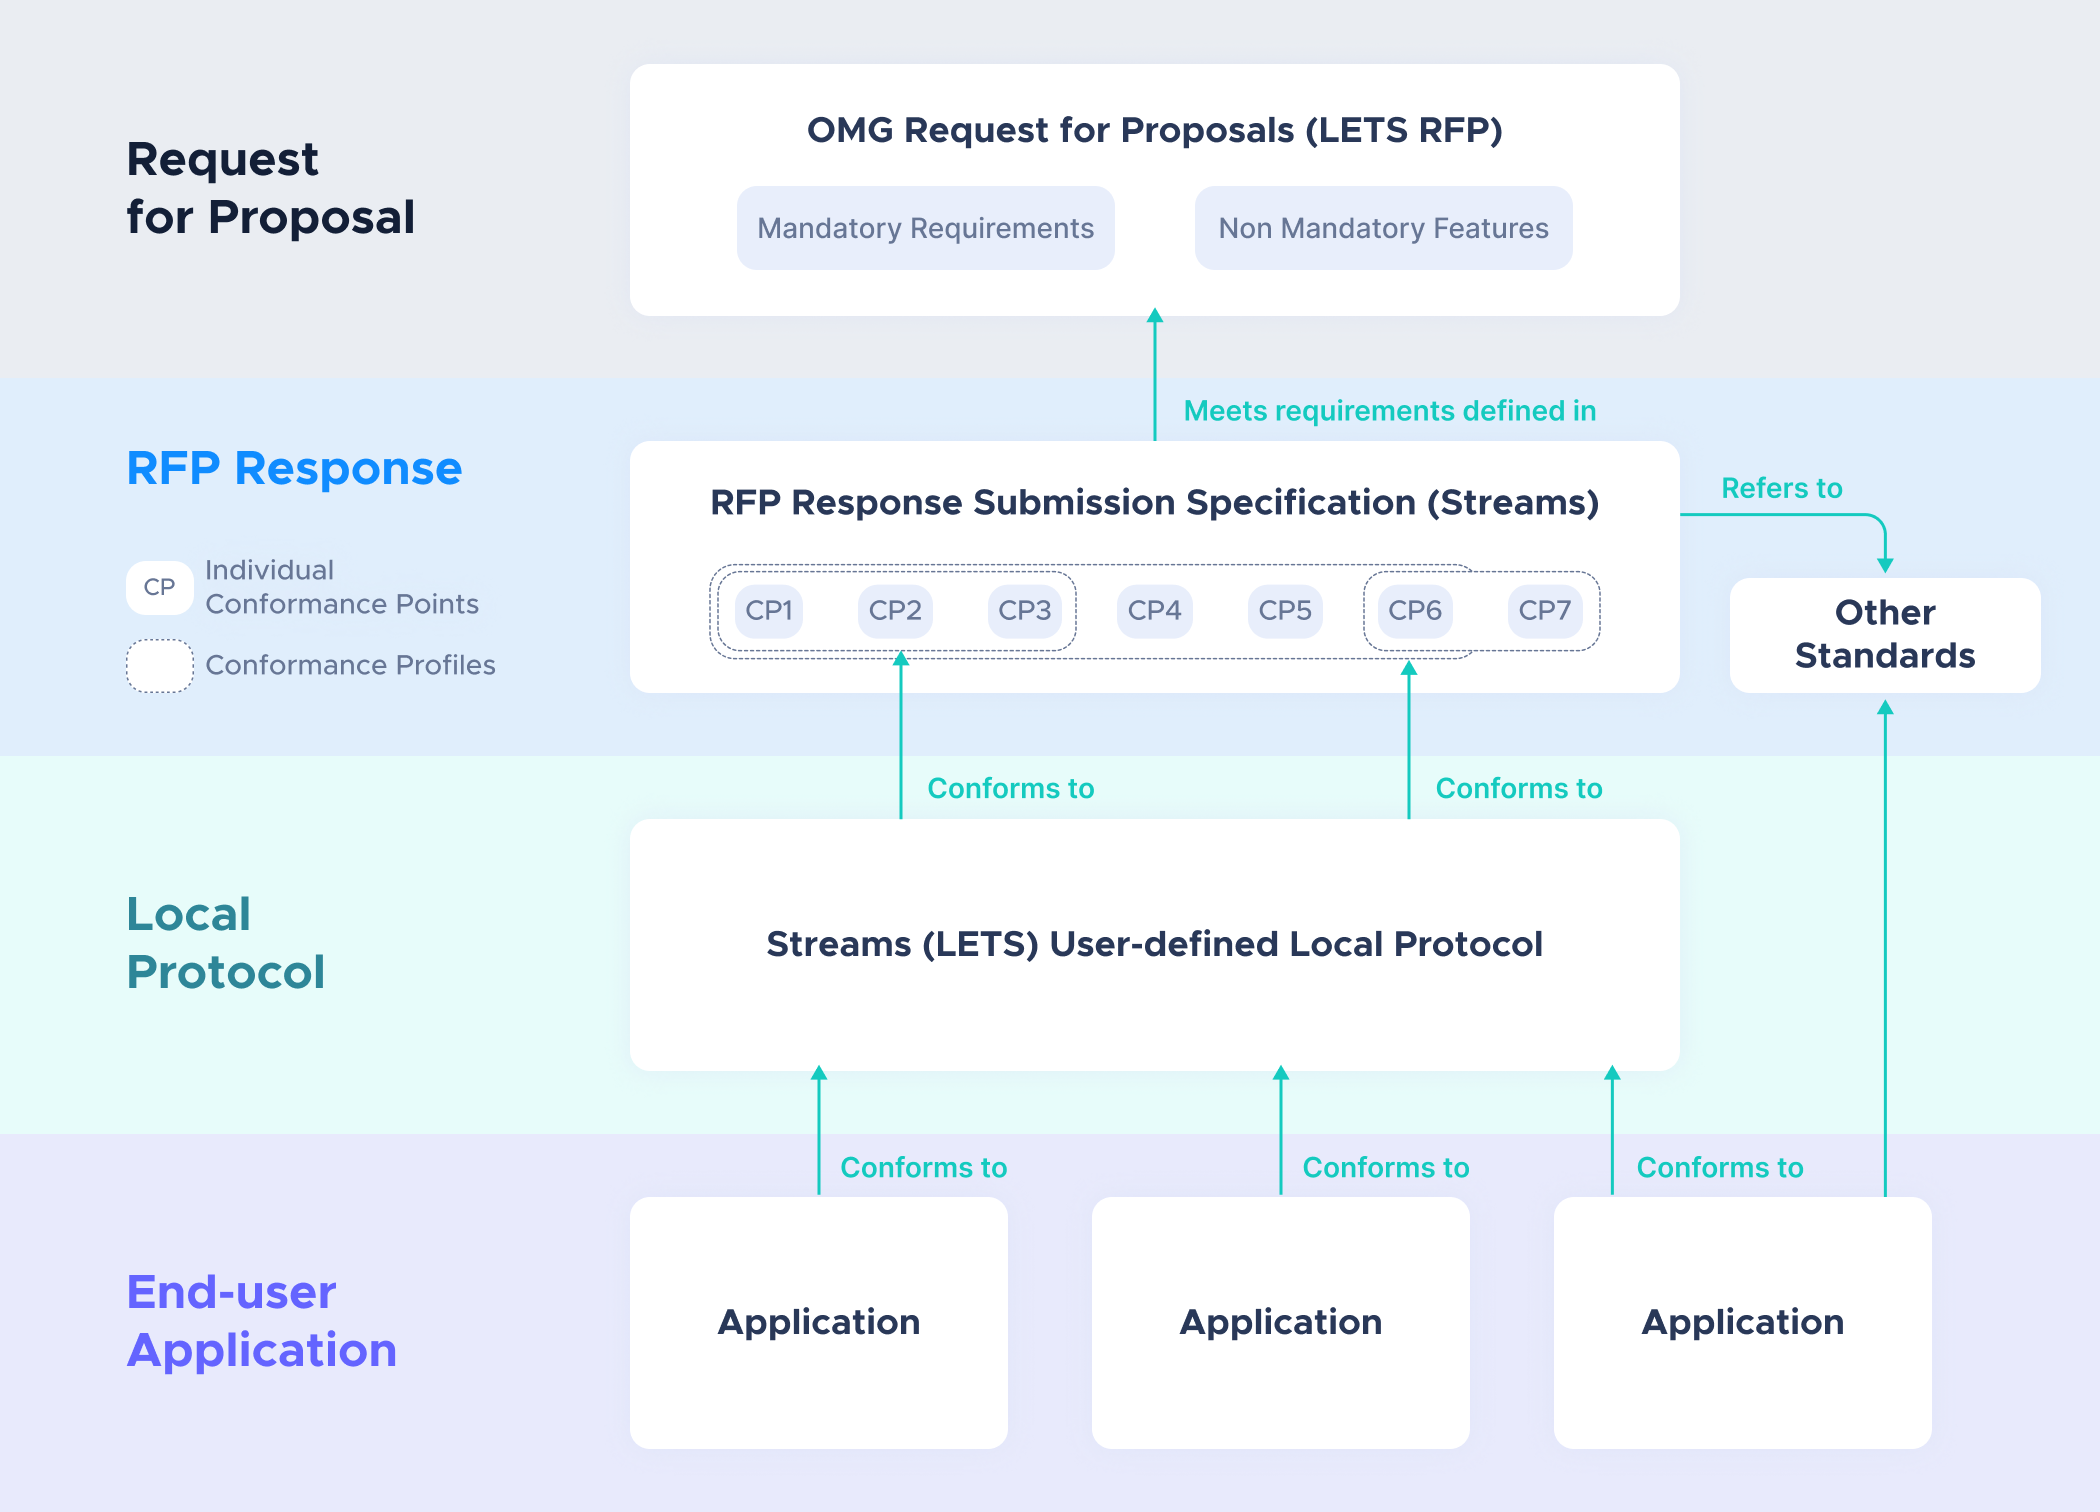 RFP, RFP Response, Local Protocol and End-user Application